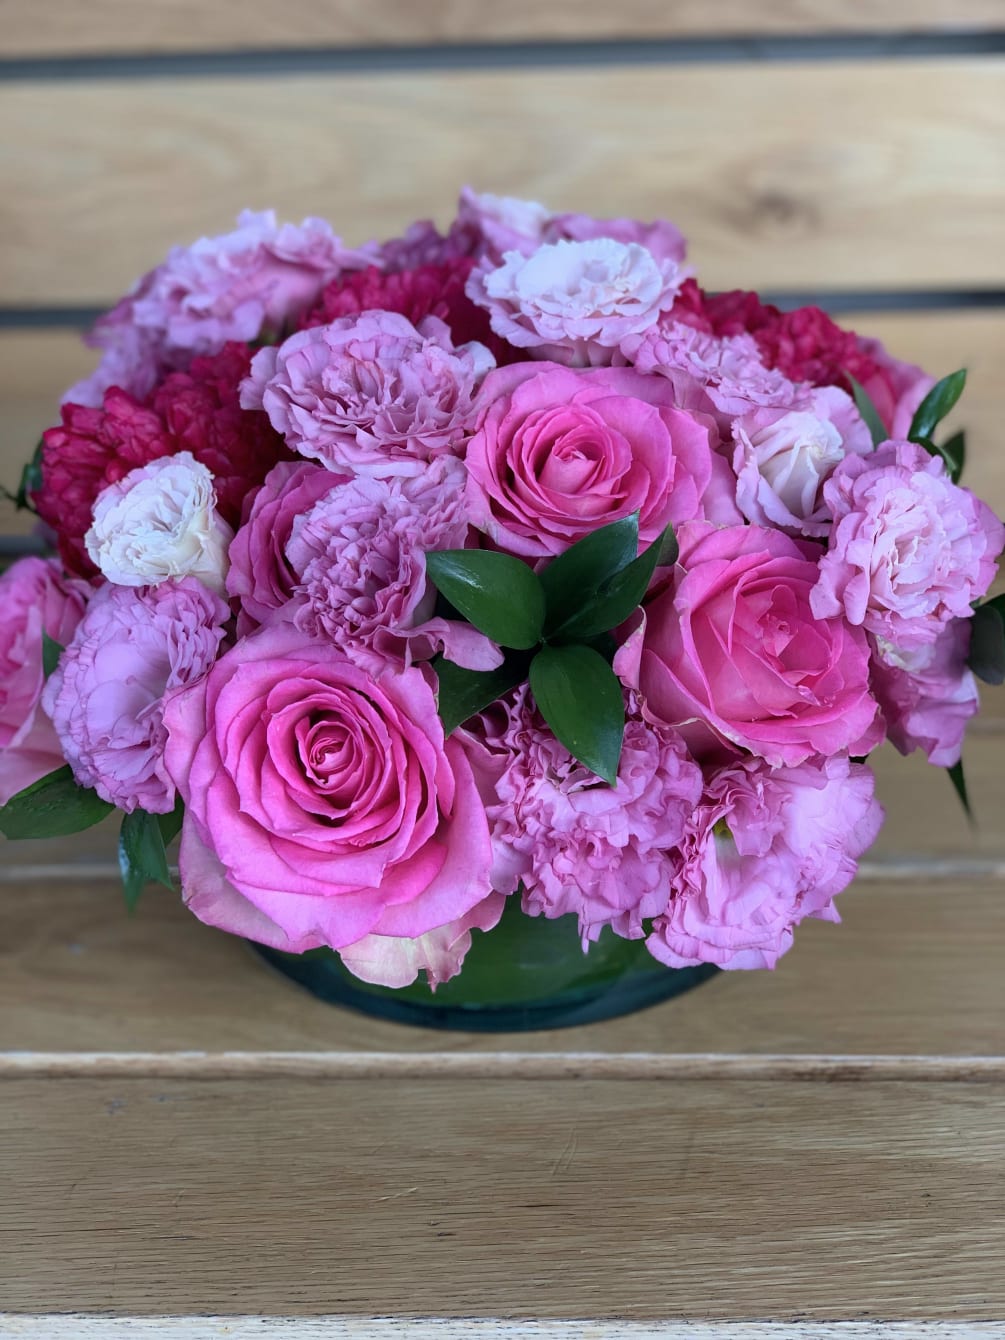 A low round vase filled with pink roses, lisianthus, hyacinths and touch